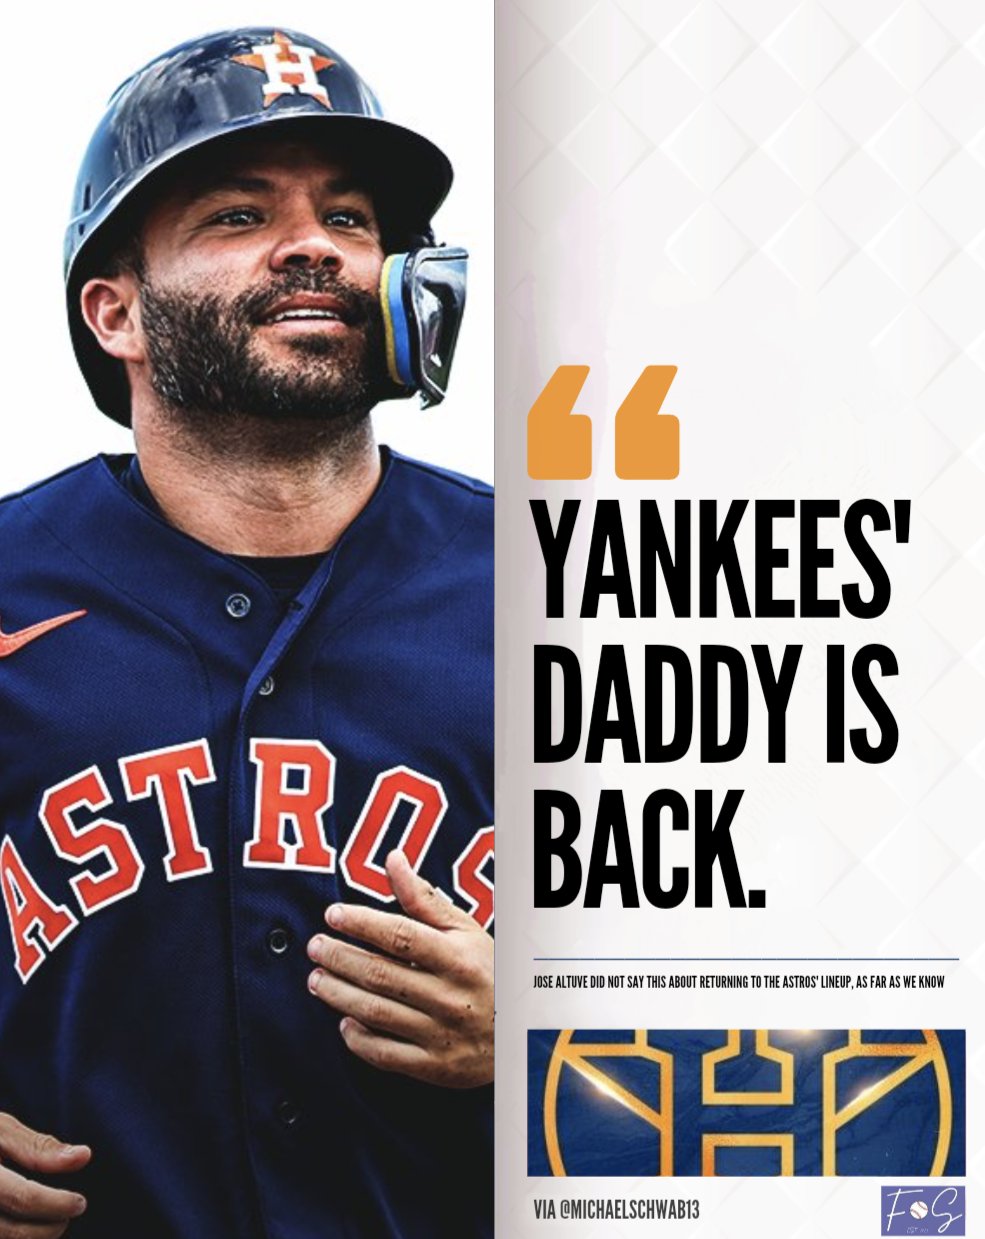 astros are the yankees daddy